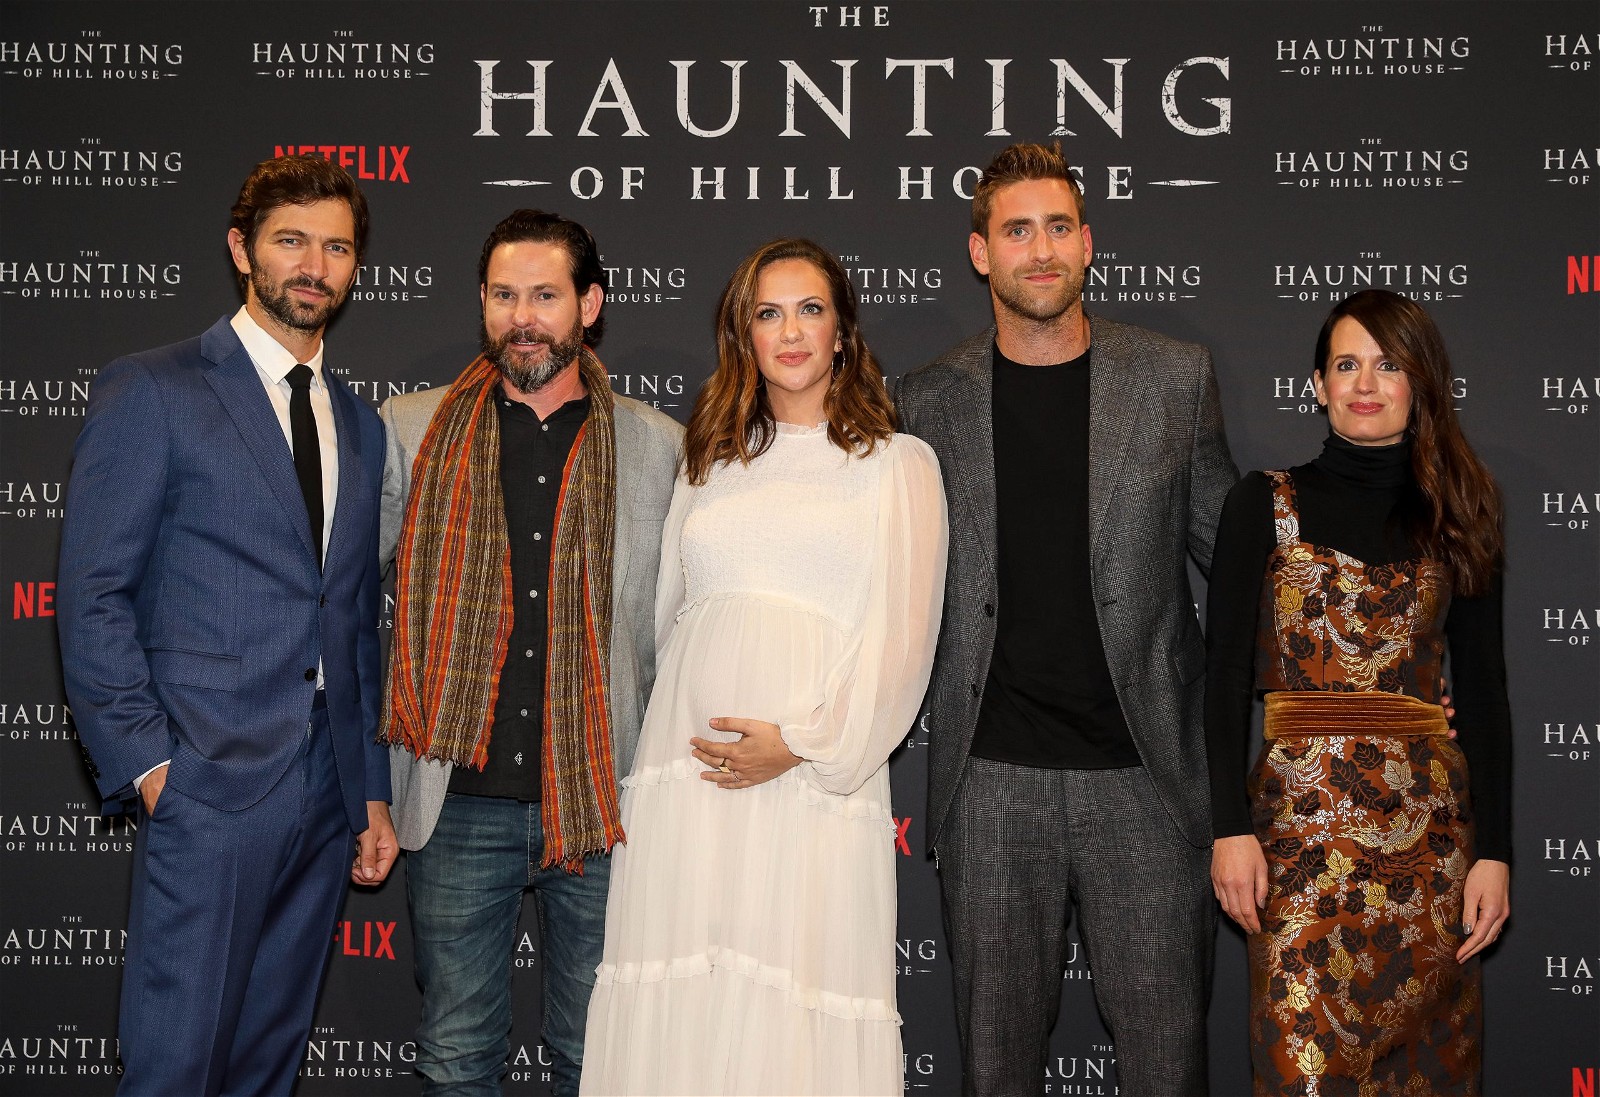 Cast of The Haunting at Hill House